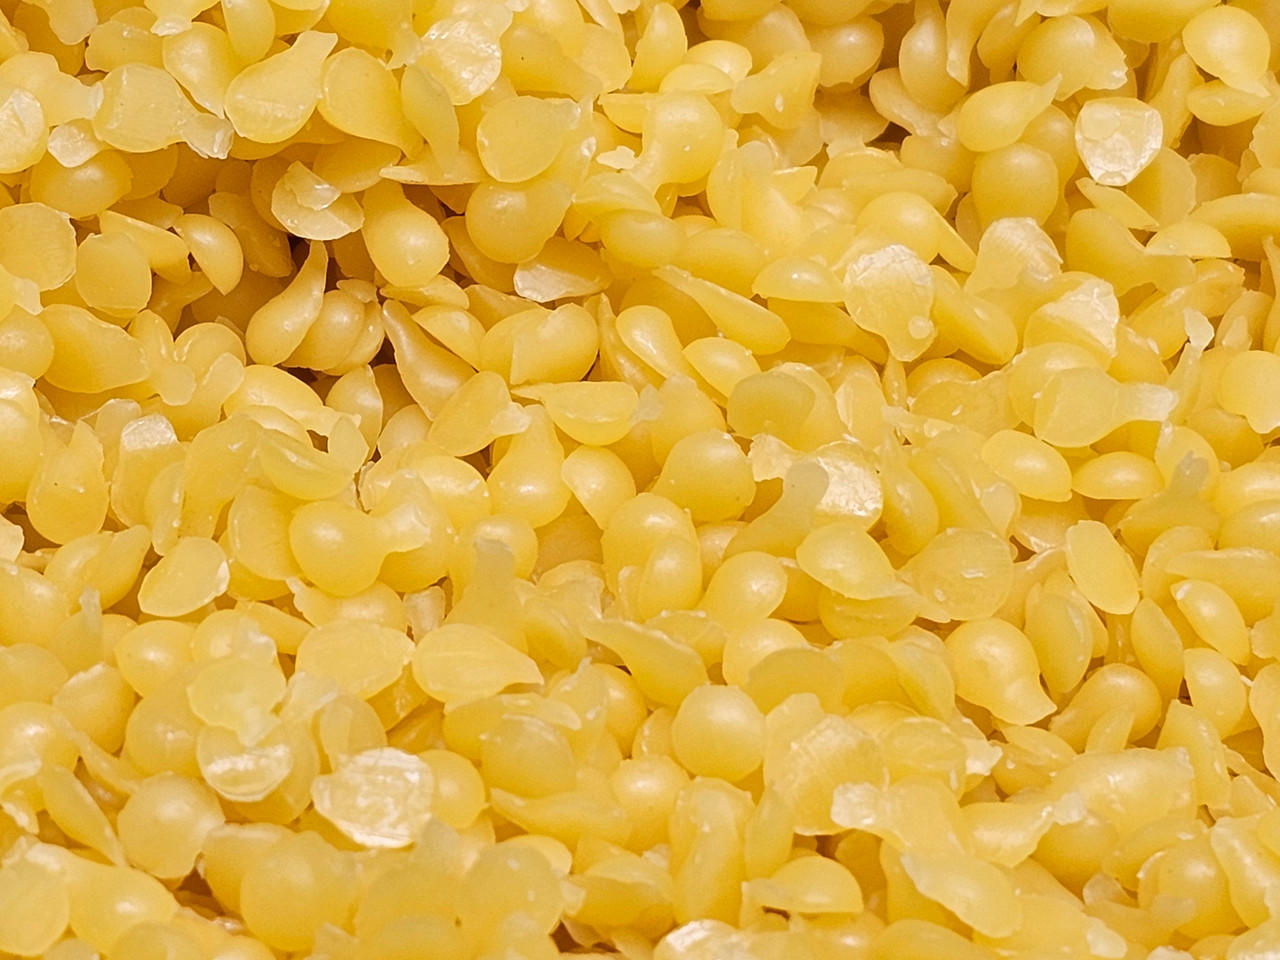 Hyoola Yellow Beeswax Pellets - 100% Natural - Premium Cosmetic Grade -  Pure Beeswax Pellets - 2 Pound - Triple Filtered Easy Melt Bees Wax  Pastilles